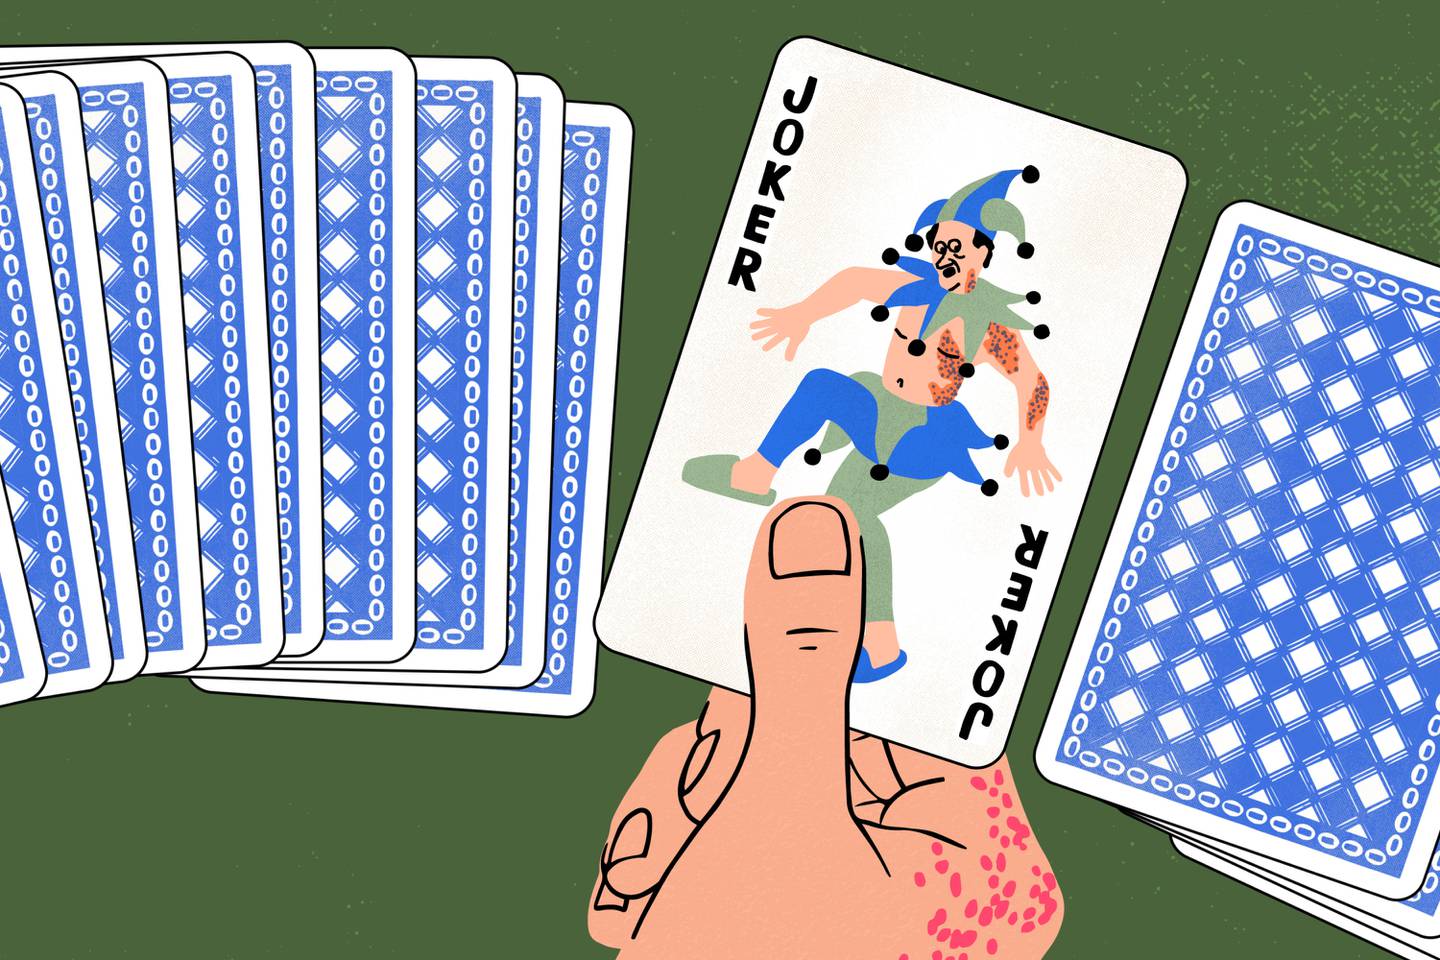 Illustration shows spread of playing cards on a dark green background. A hand holds a Joker card. The Joker isn’t wearing a shirt and has shingles pustules on his chest and left arm. Pustules grow on the hand holding the card.